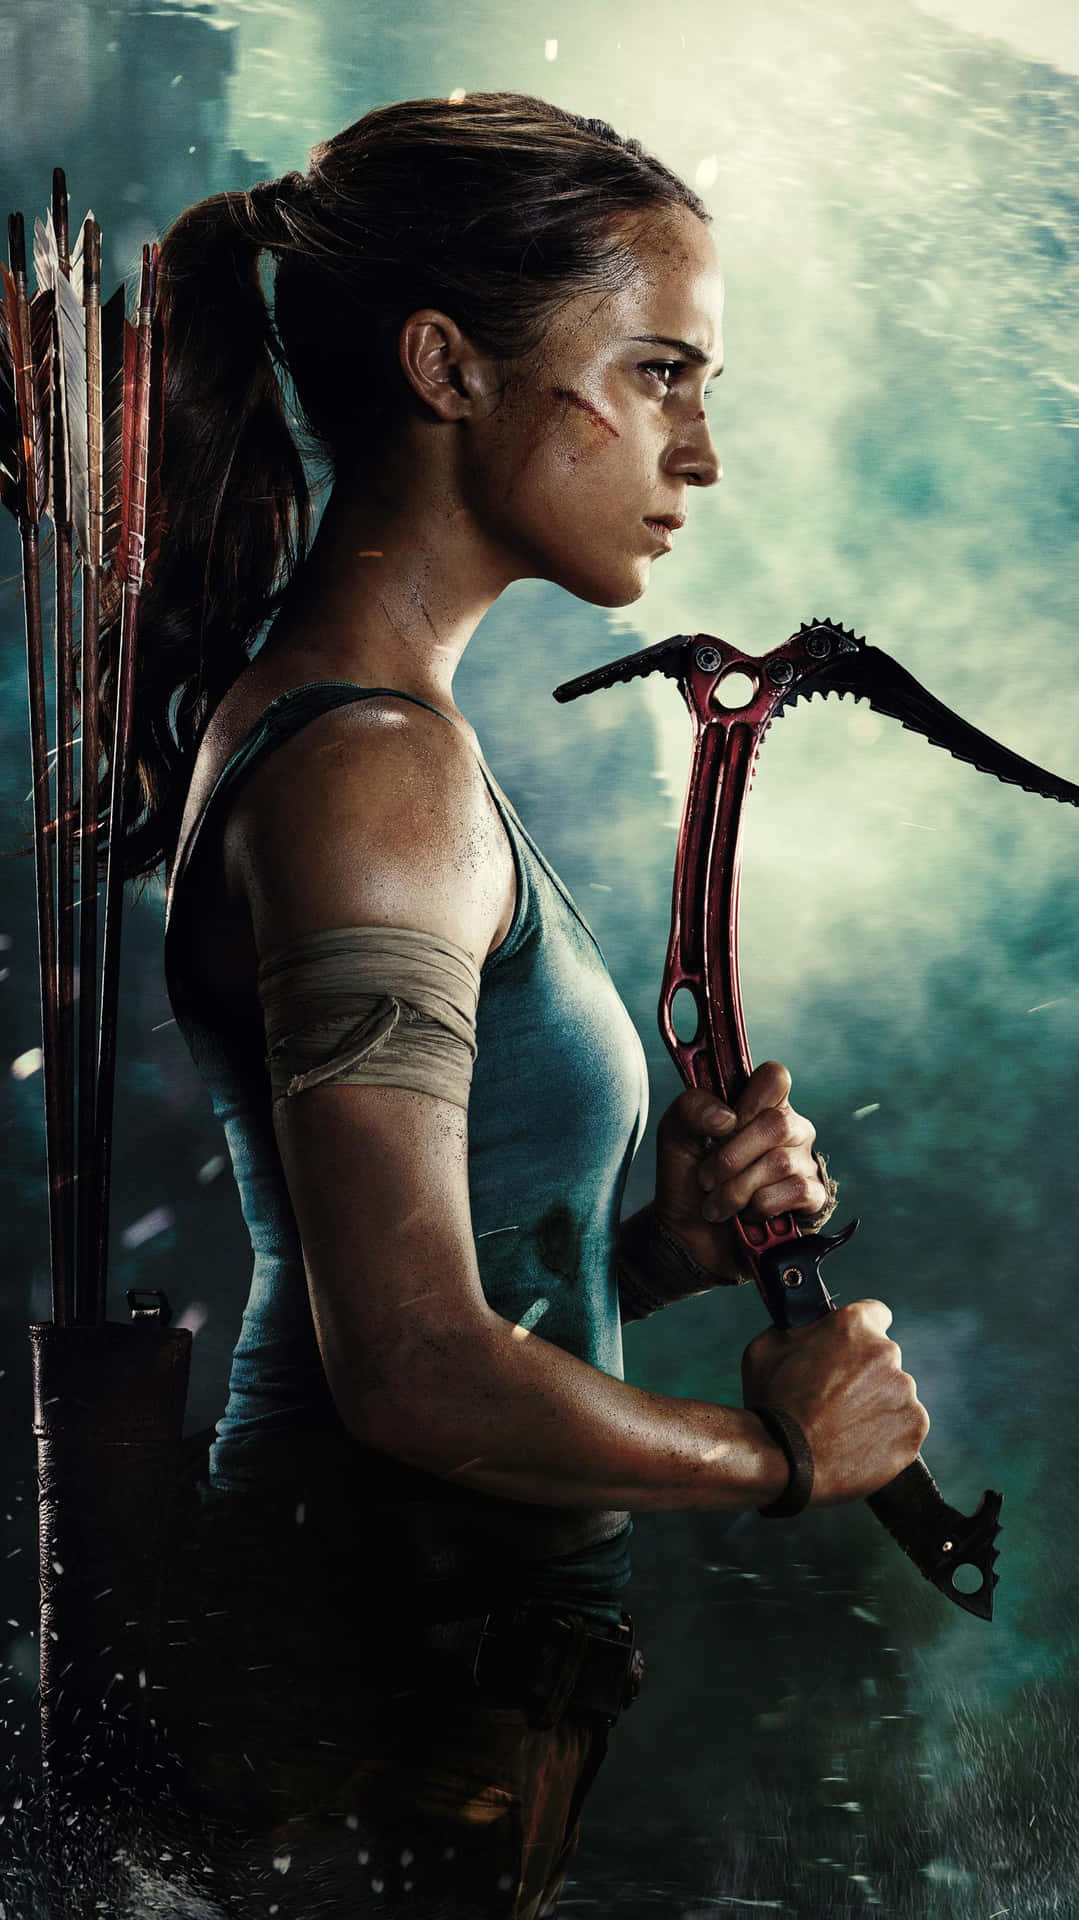 Rise to new challenges with the legendary Lara Croft Wallpaper